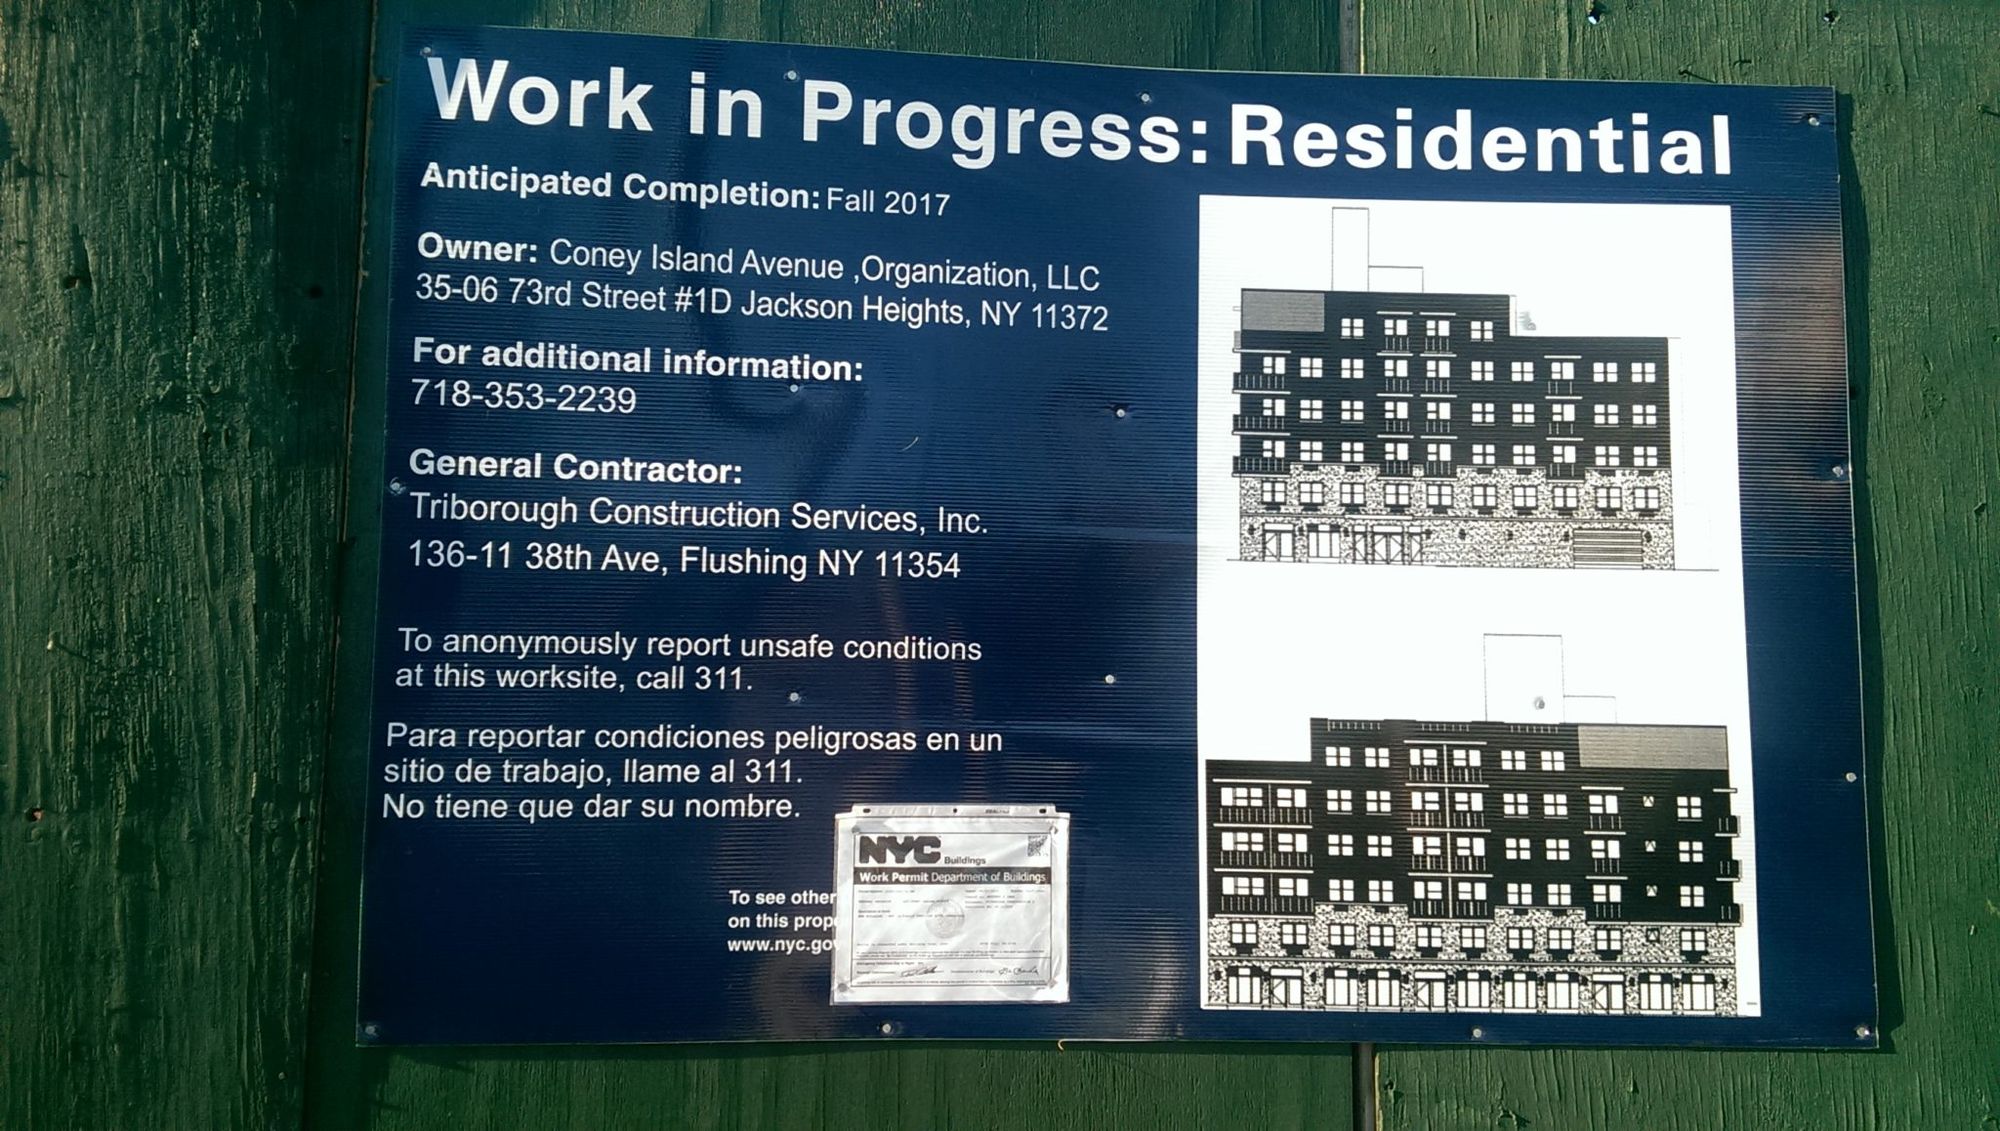 New Residential Building Coming To Coney Island Avenue